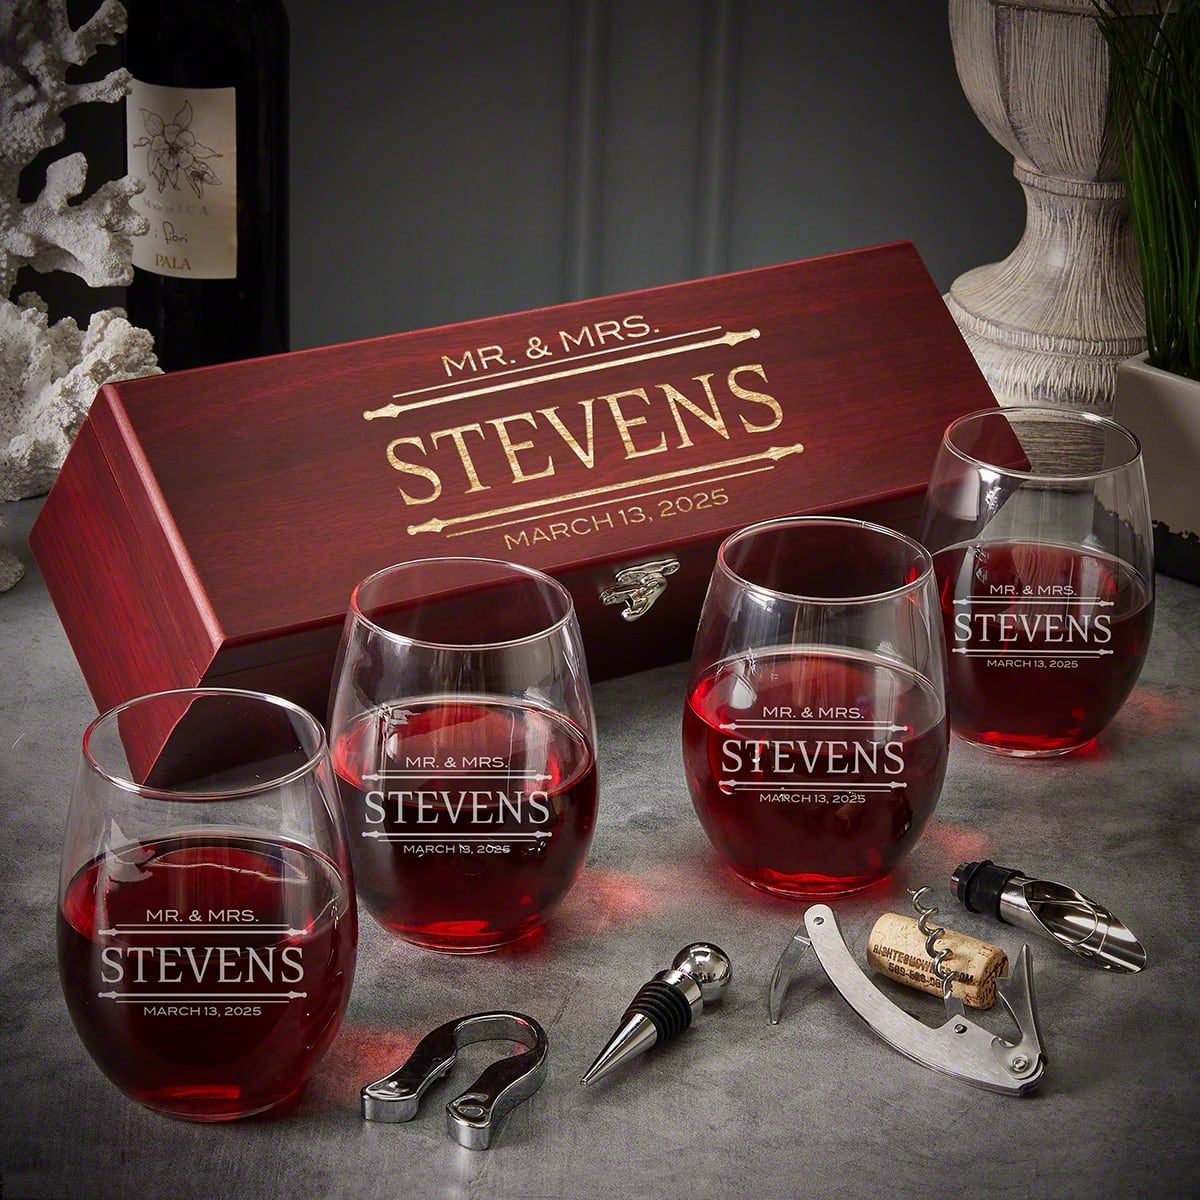 https://images.homewetbar.com/media/catalog/product/e/n/engraved-rose-wood-box-and-stemless-wine-glasses-stanford-p-10785.jpg?store=default&image-type=image